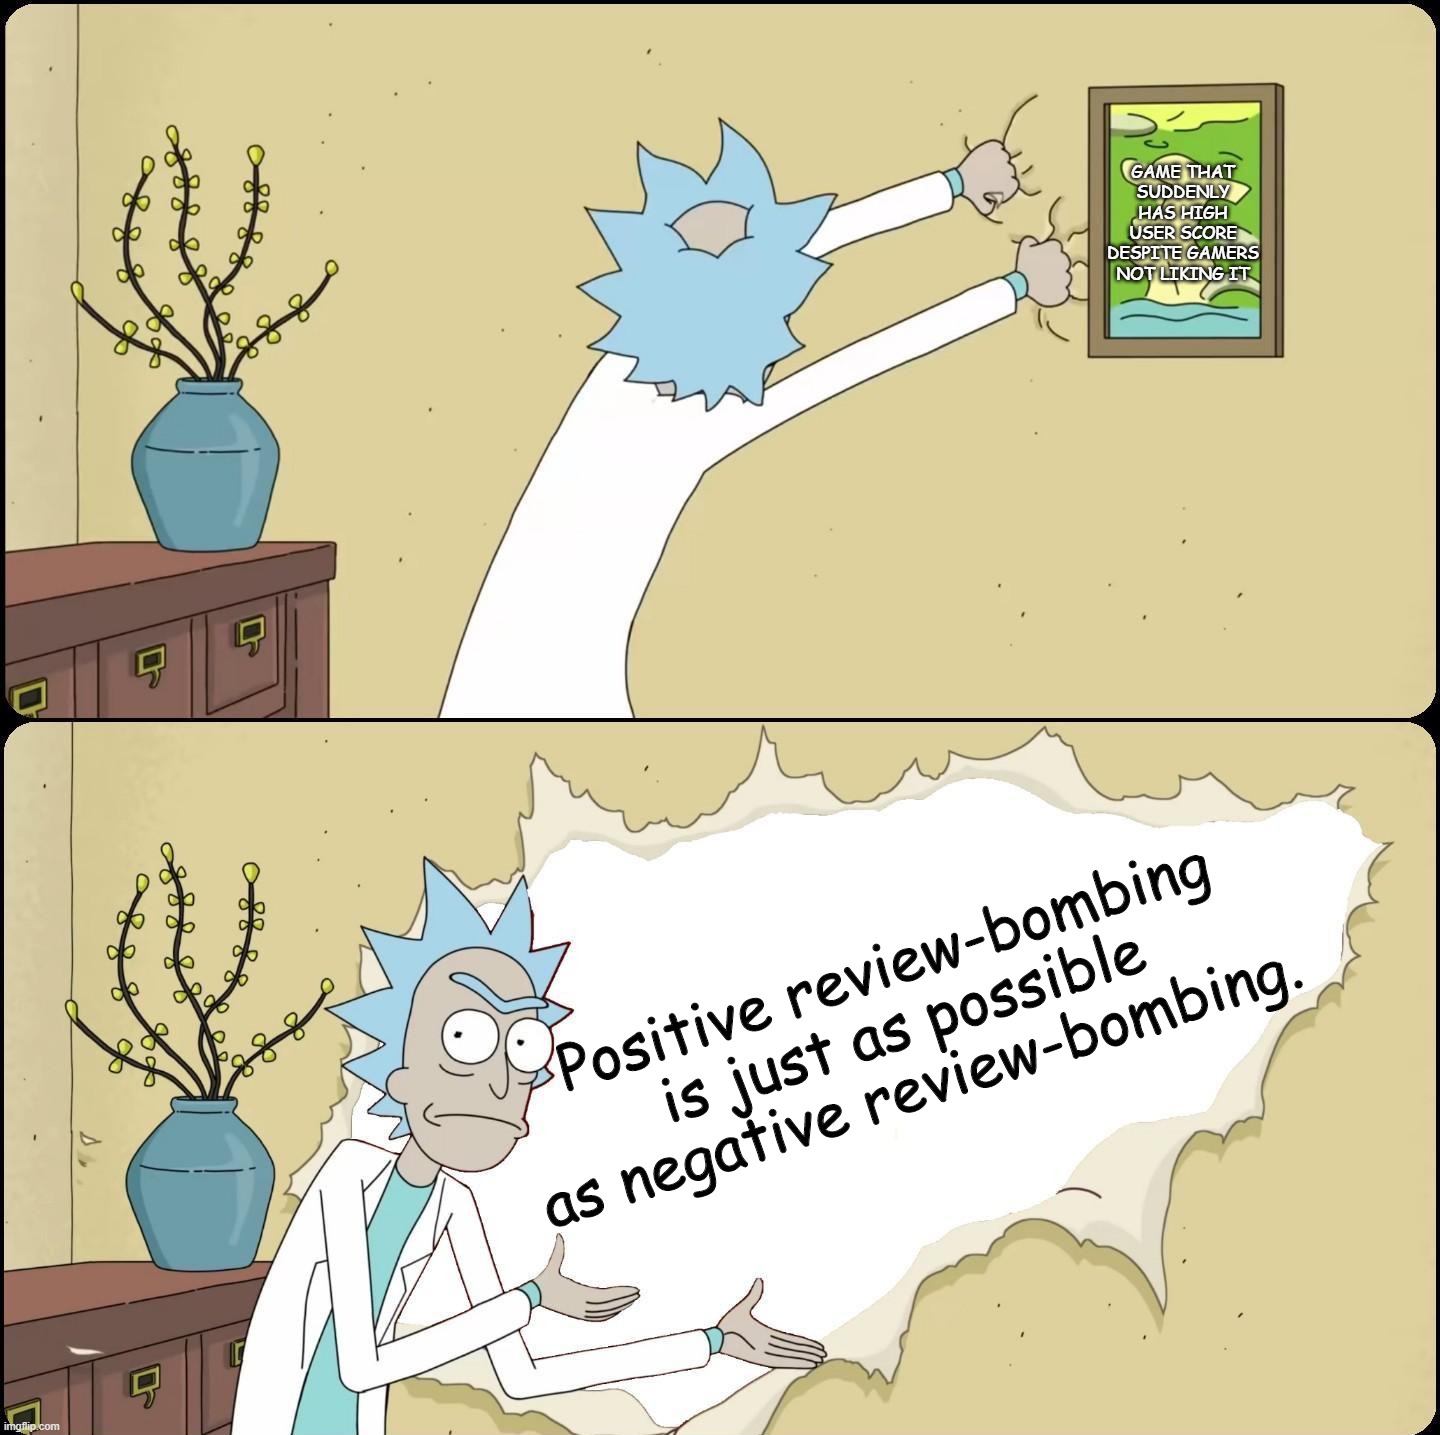 Rick Rips Wallpaper | GAME THAT SUDDENLY HAS HIGH USER SCORE DESPITE GAMERS NOT LIKING IT; Positive review-bombing is just as possible as negative review-bombing. | image tagged in rick rips wallpaper | made w/ Imgflip meme maker